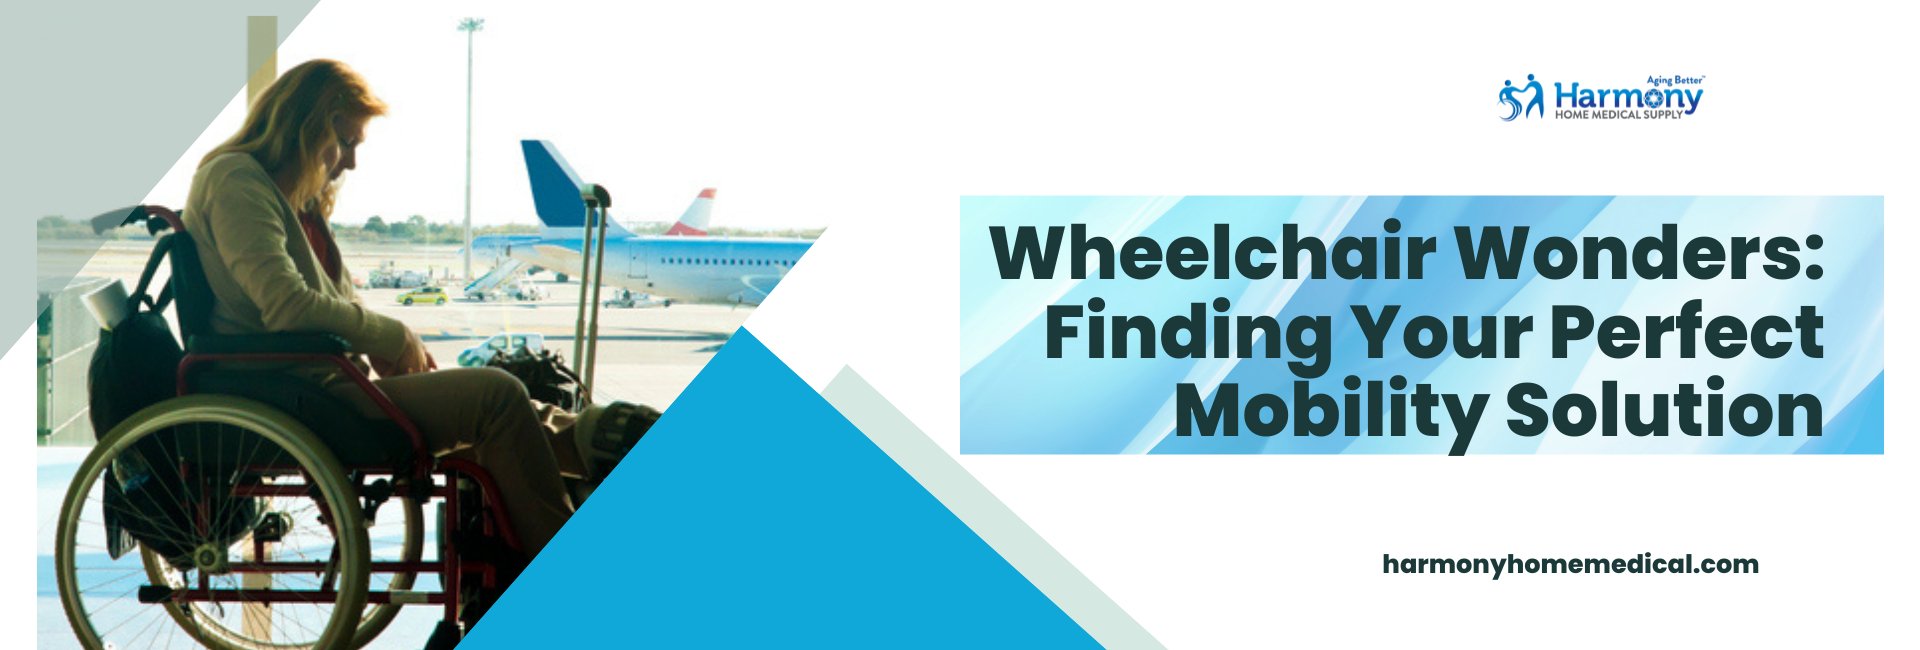 Wheelchair Wonders: Finding Your Perfect Mobility Solution